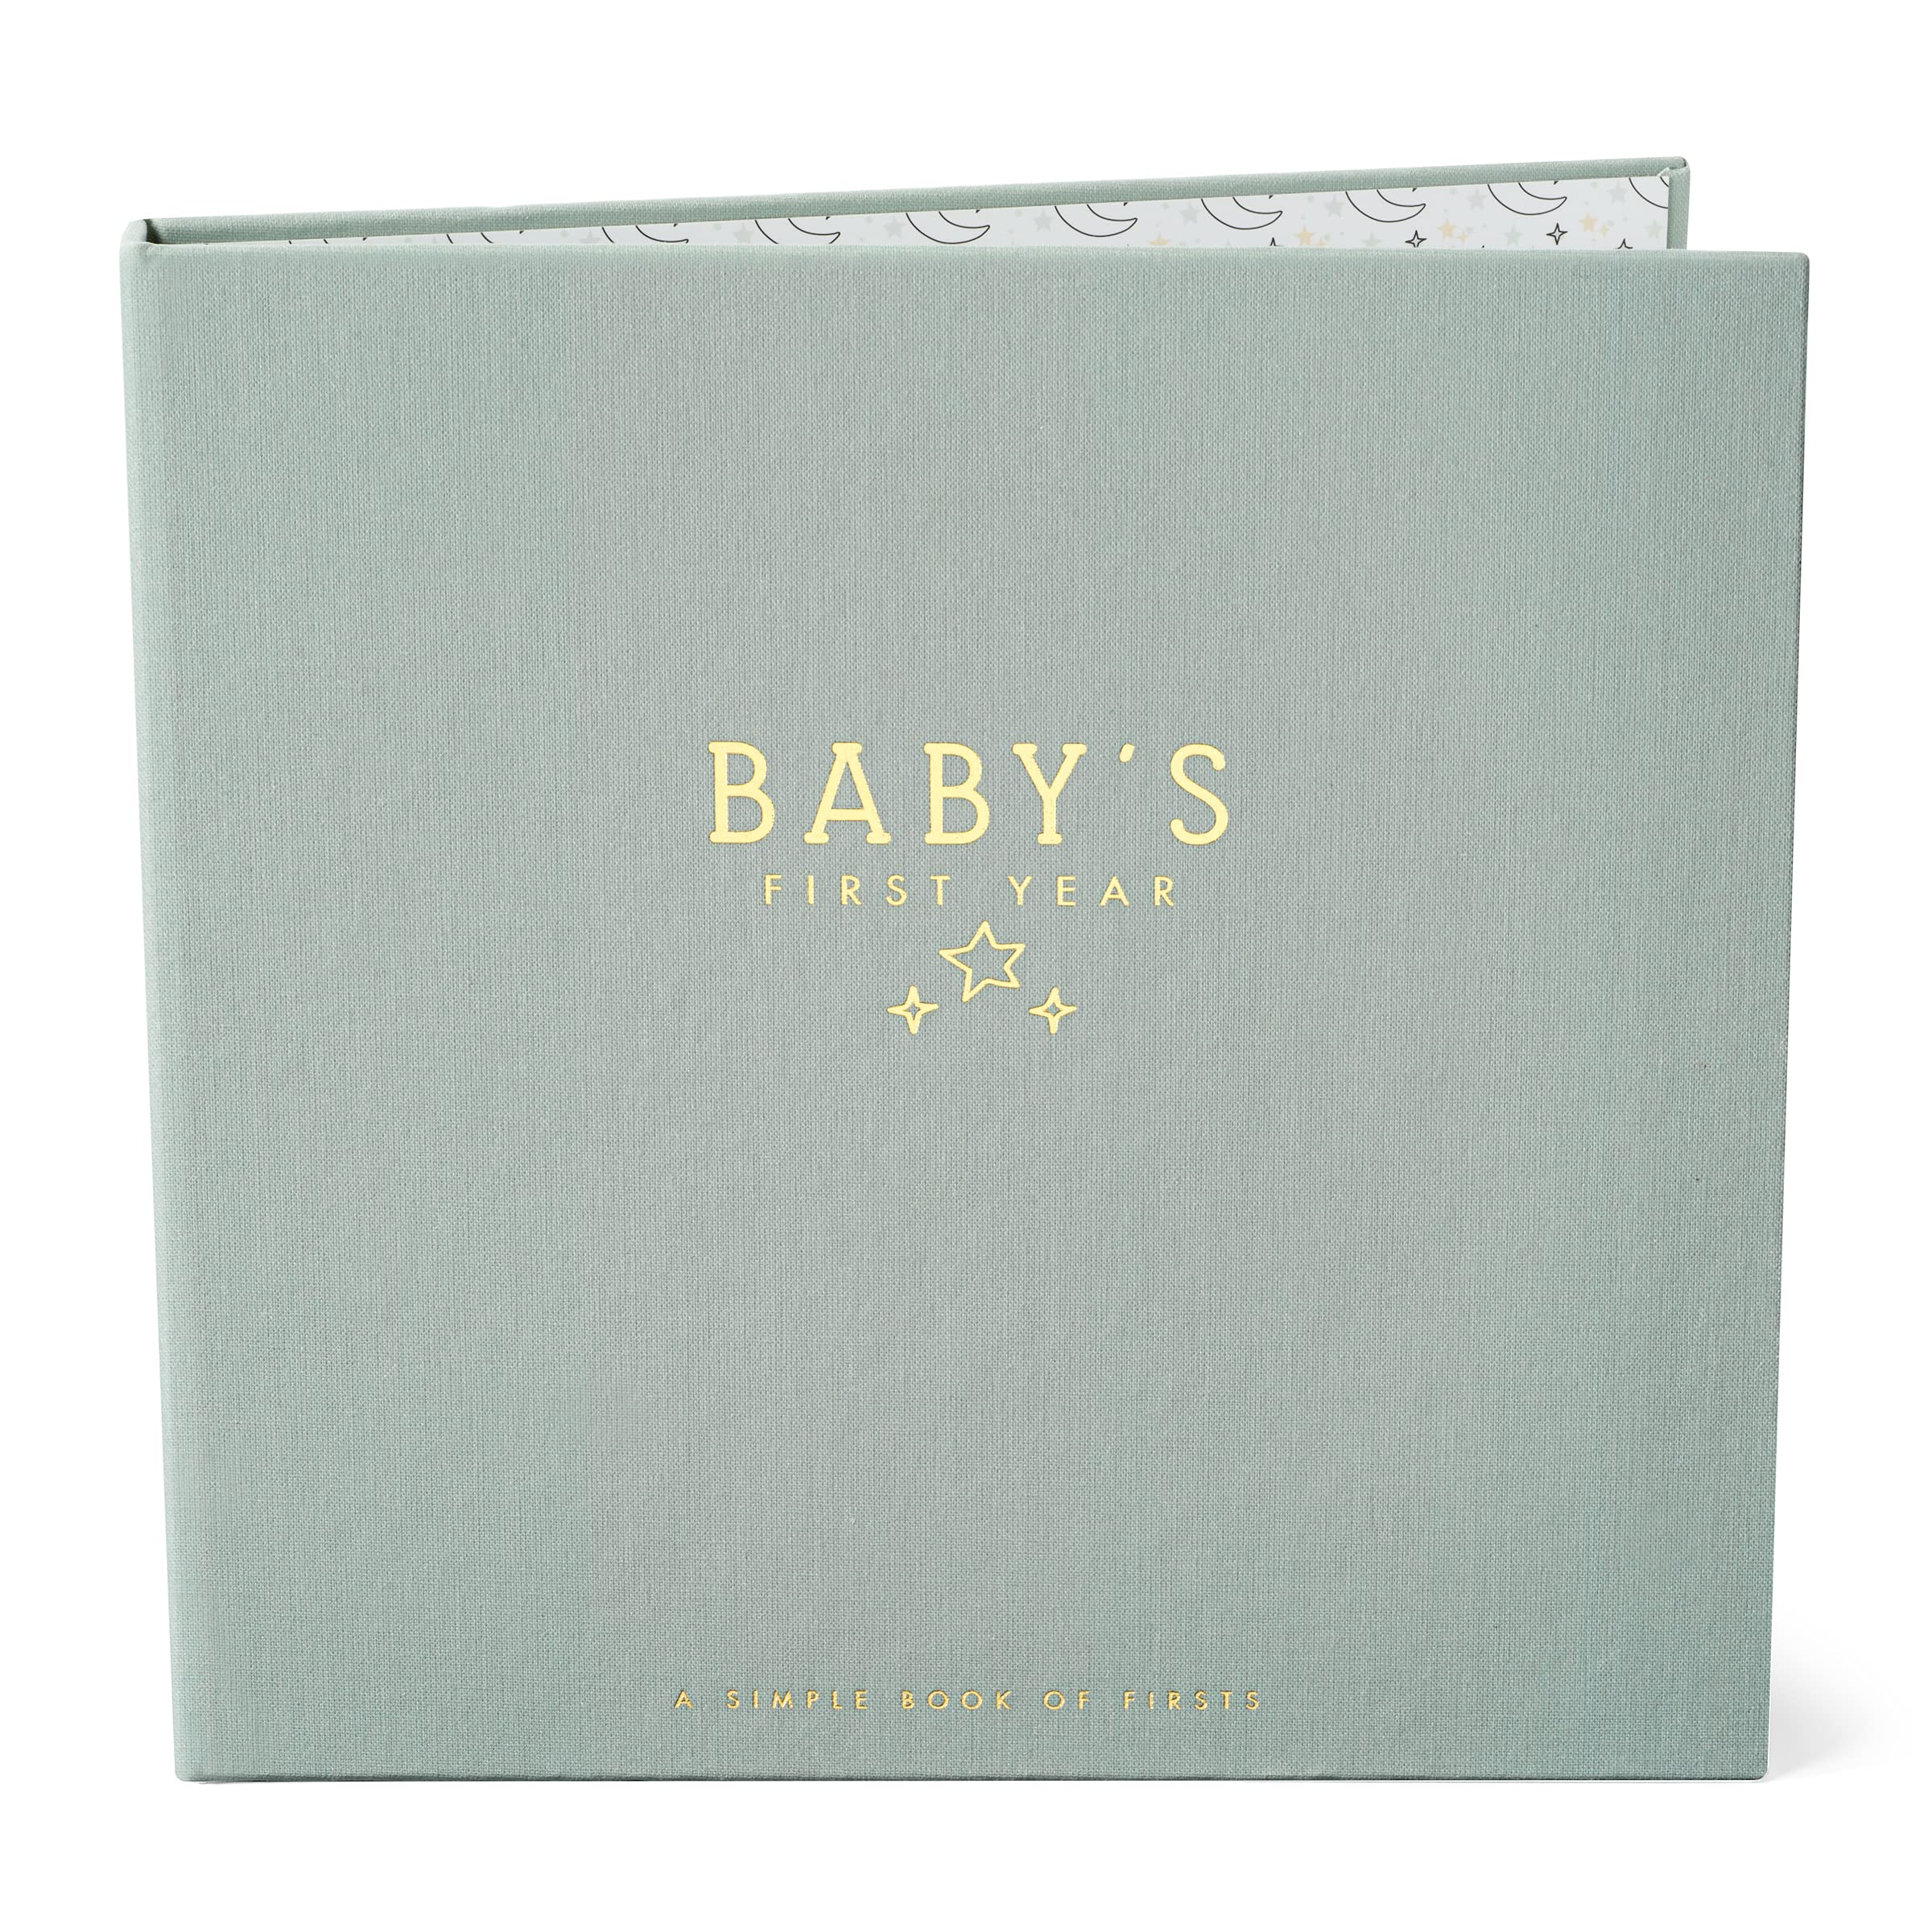 Lucy Darling Celestial Skies Theme Luxury Baby Memory Book - First Year Journal Album Photo Book To Capture Precious Memories - Keepsake Pregnancy Baby Record Book For Boy Or Girl